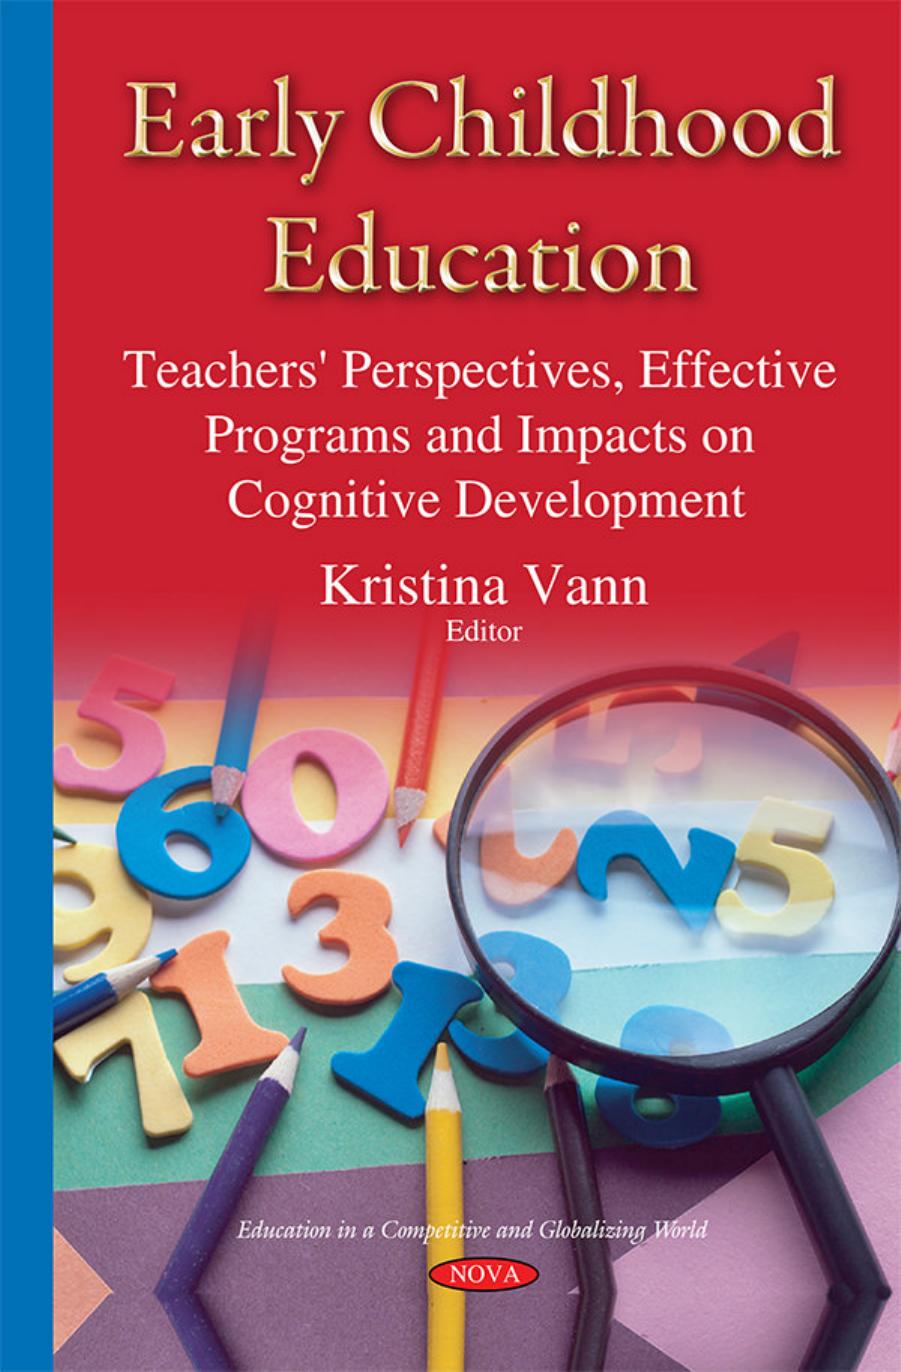 Early Childhood Education: Teachers' Perspectives, Effective Programs and Impacts on Cognitive Development